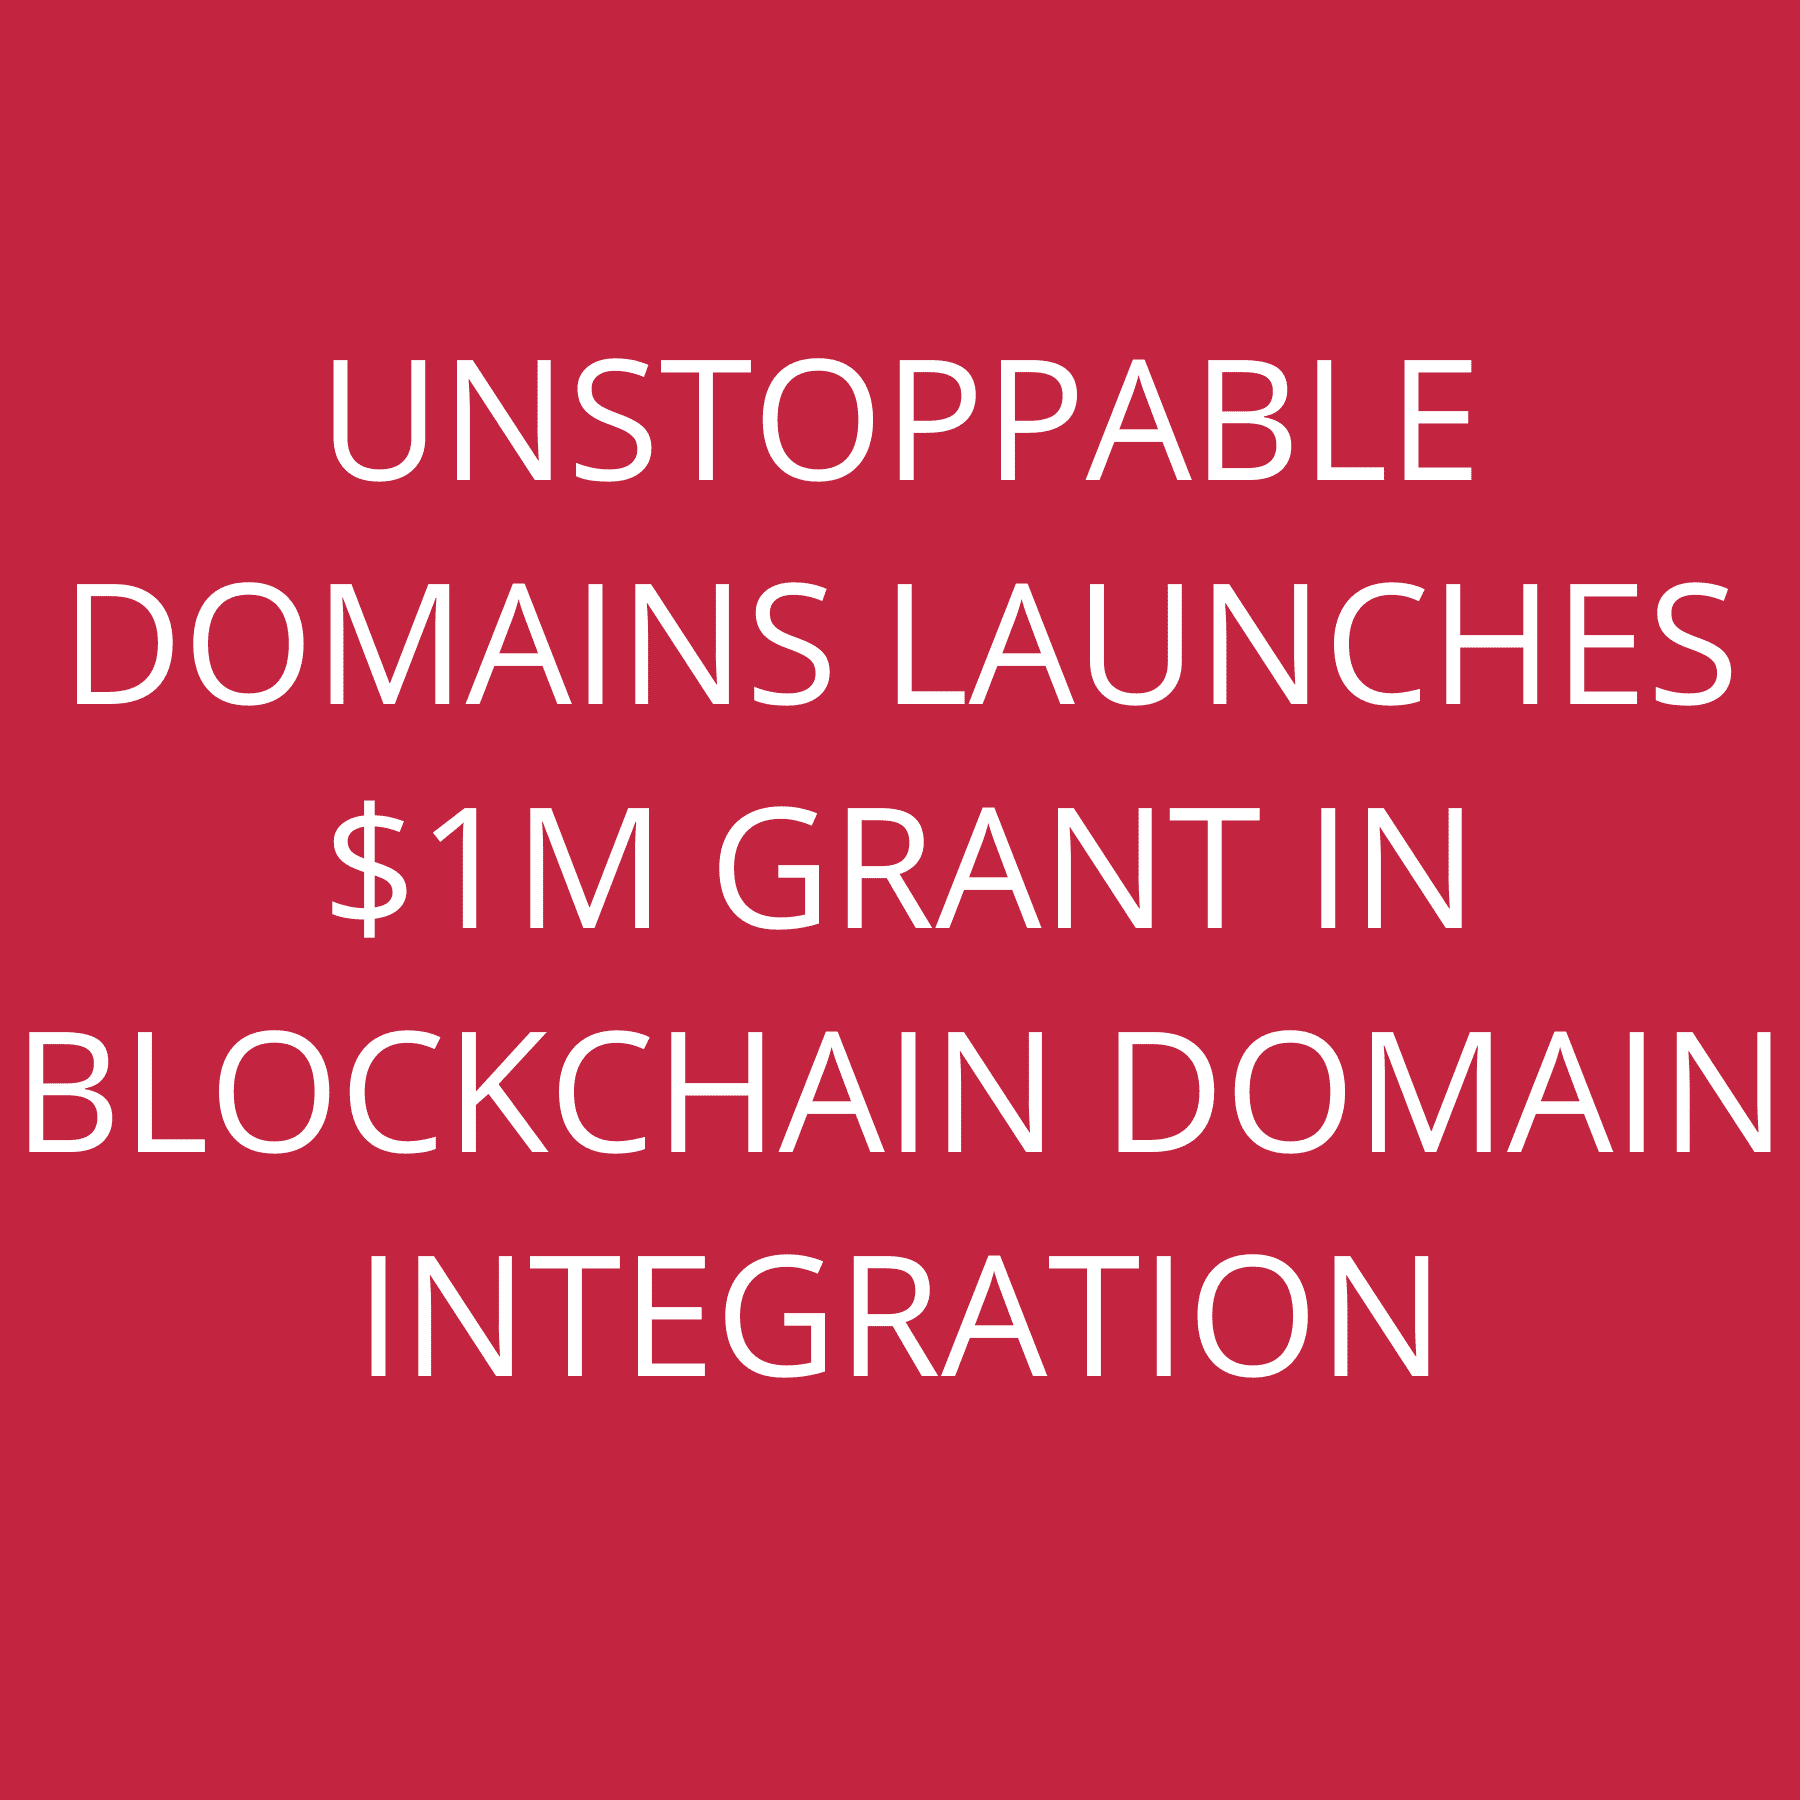 Unstoppable Domains launches $1M grant in Blockchain Domain Integration